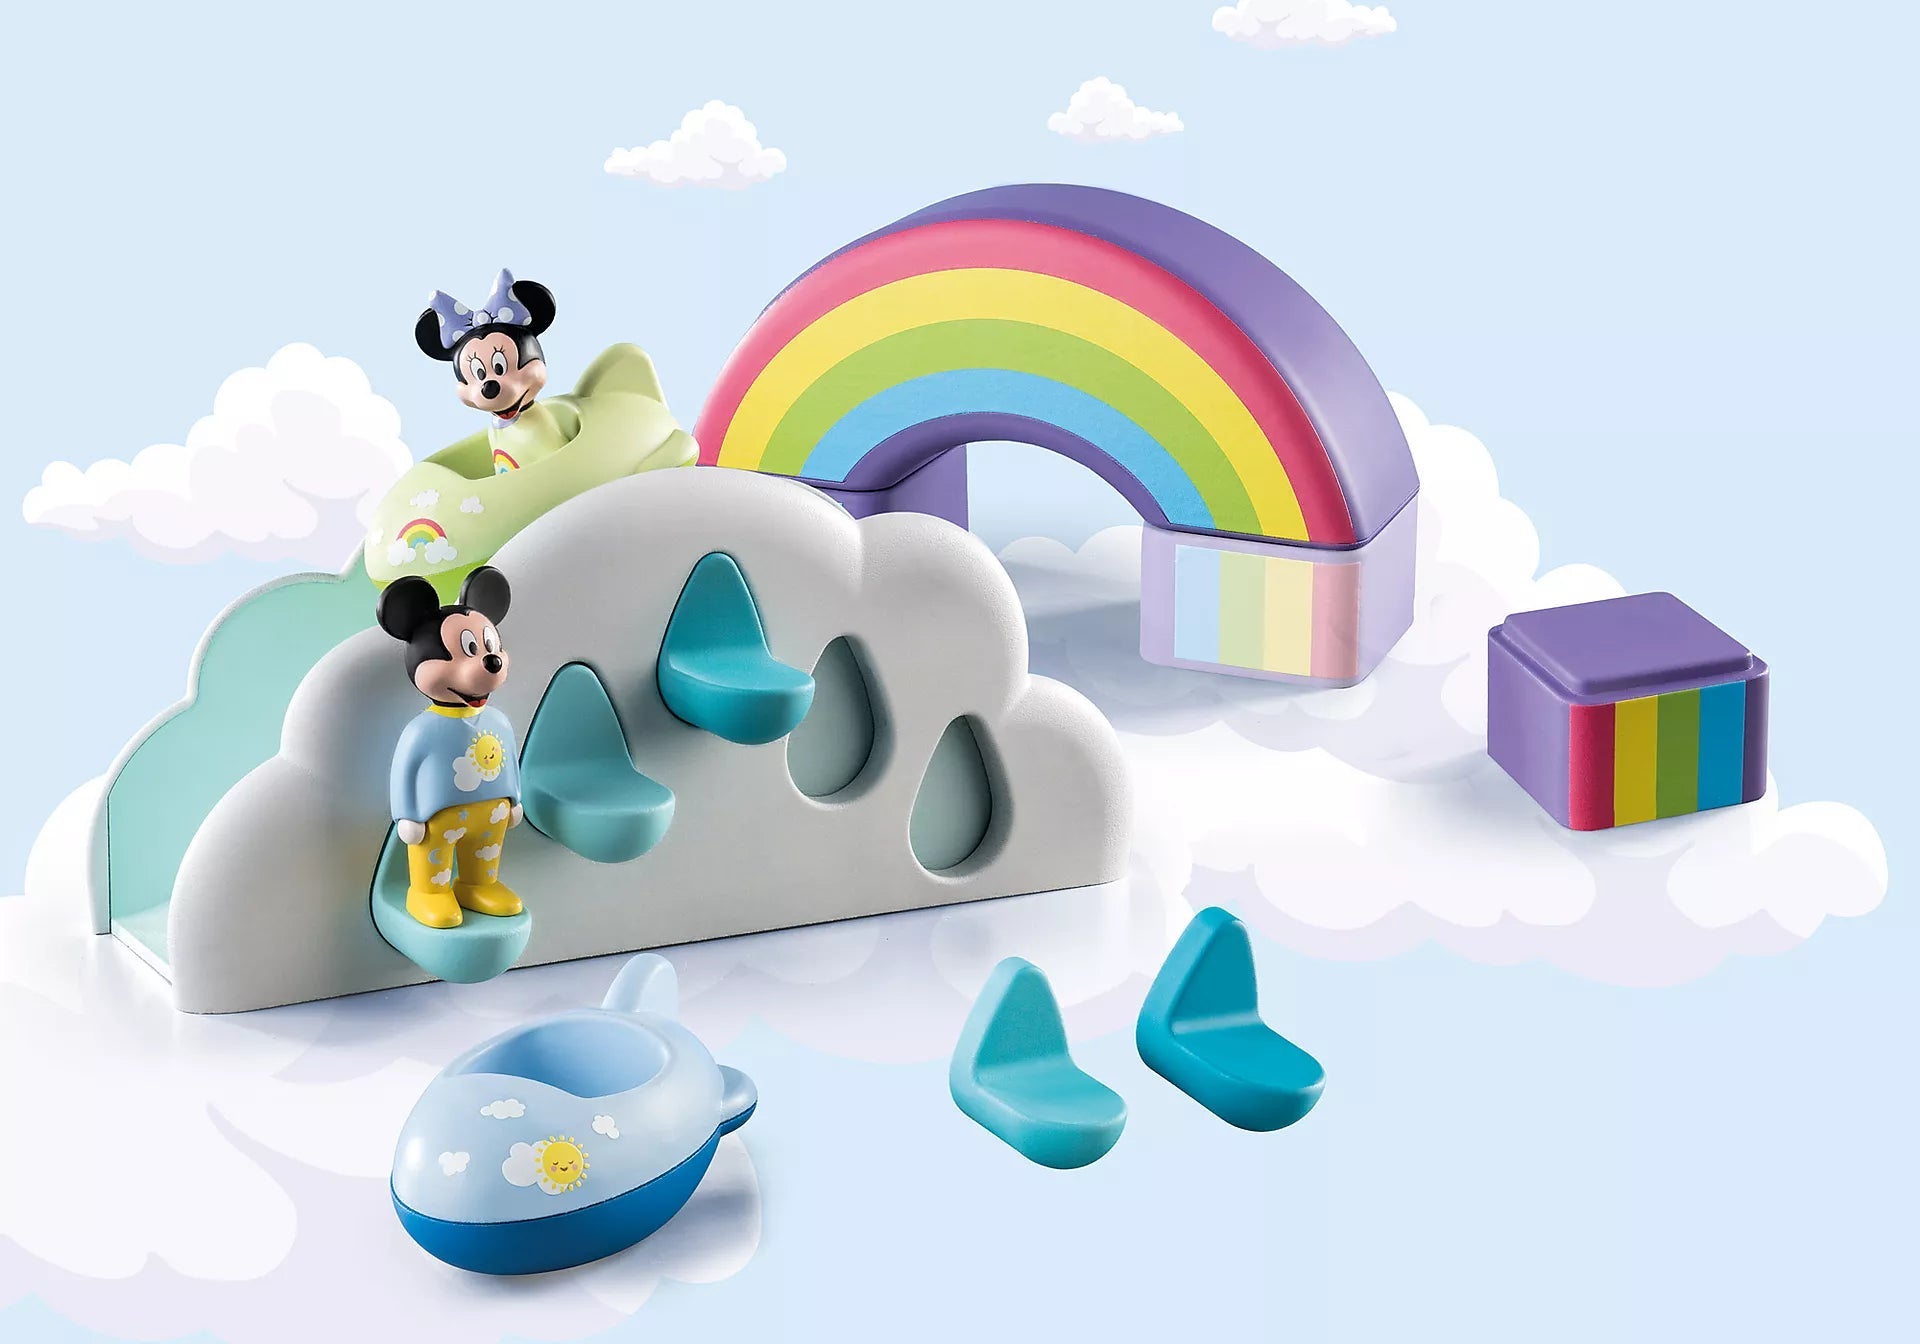 Playmobil 123 - Mickey & Minnie's Home in the Clouds